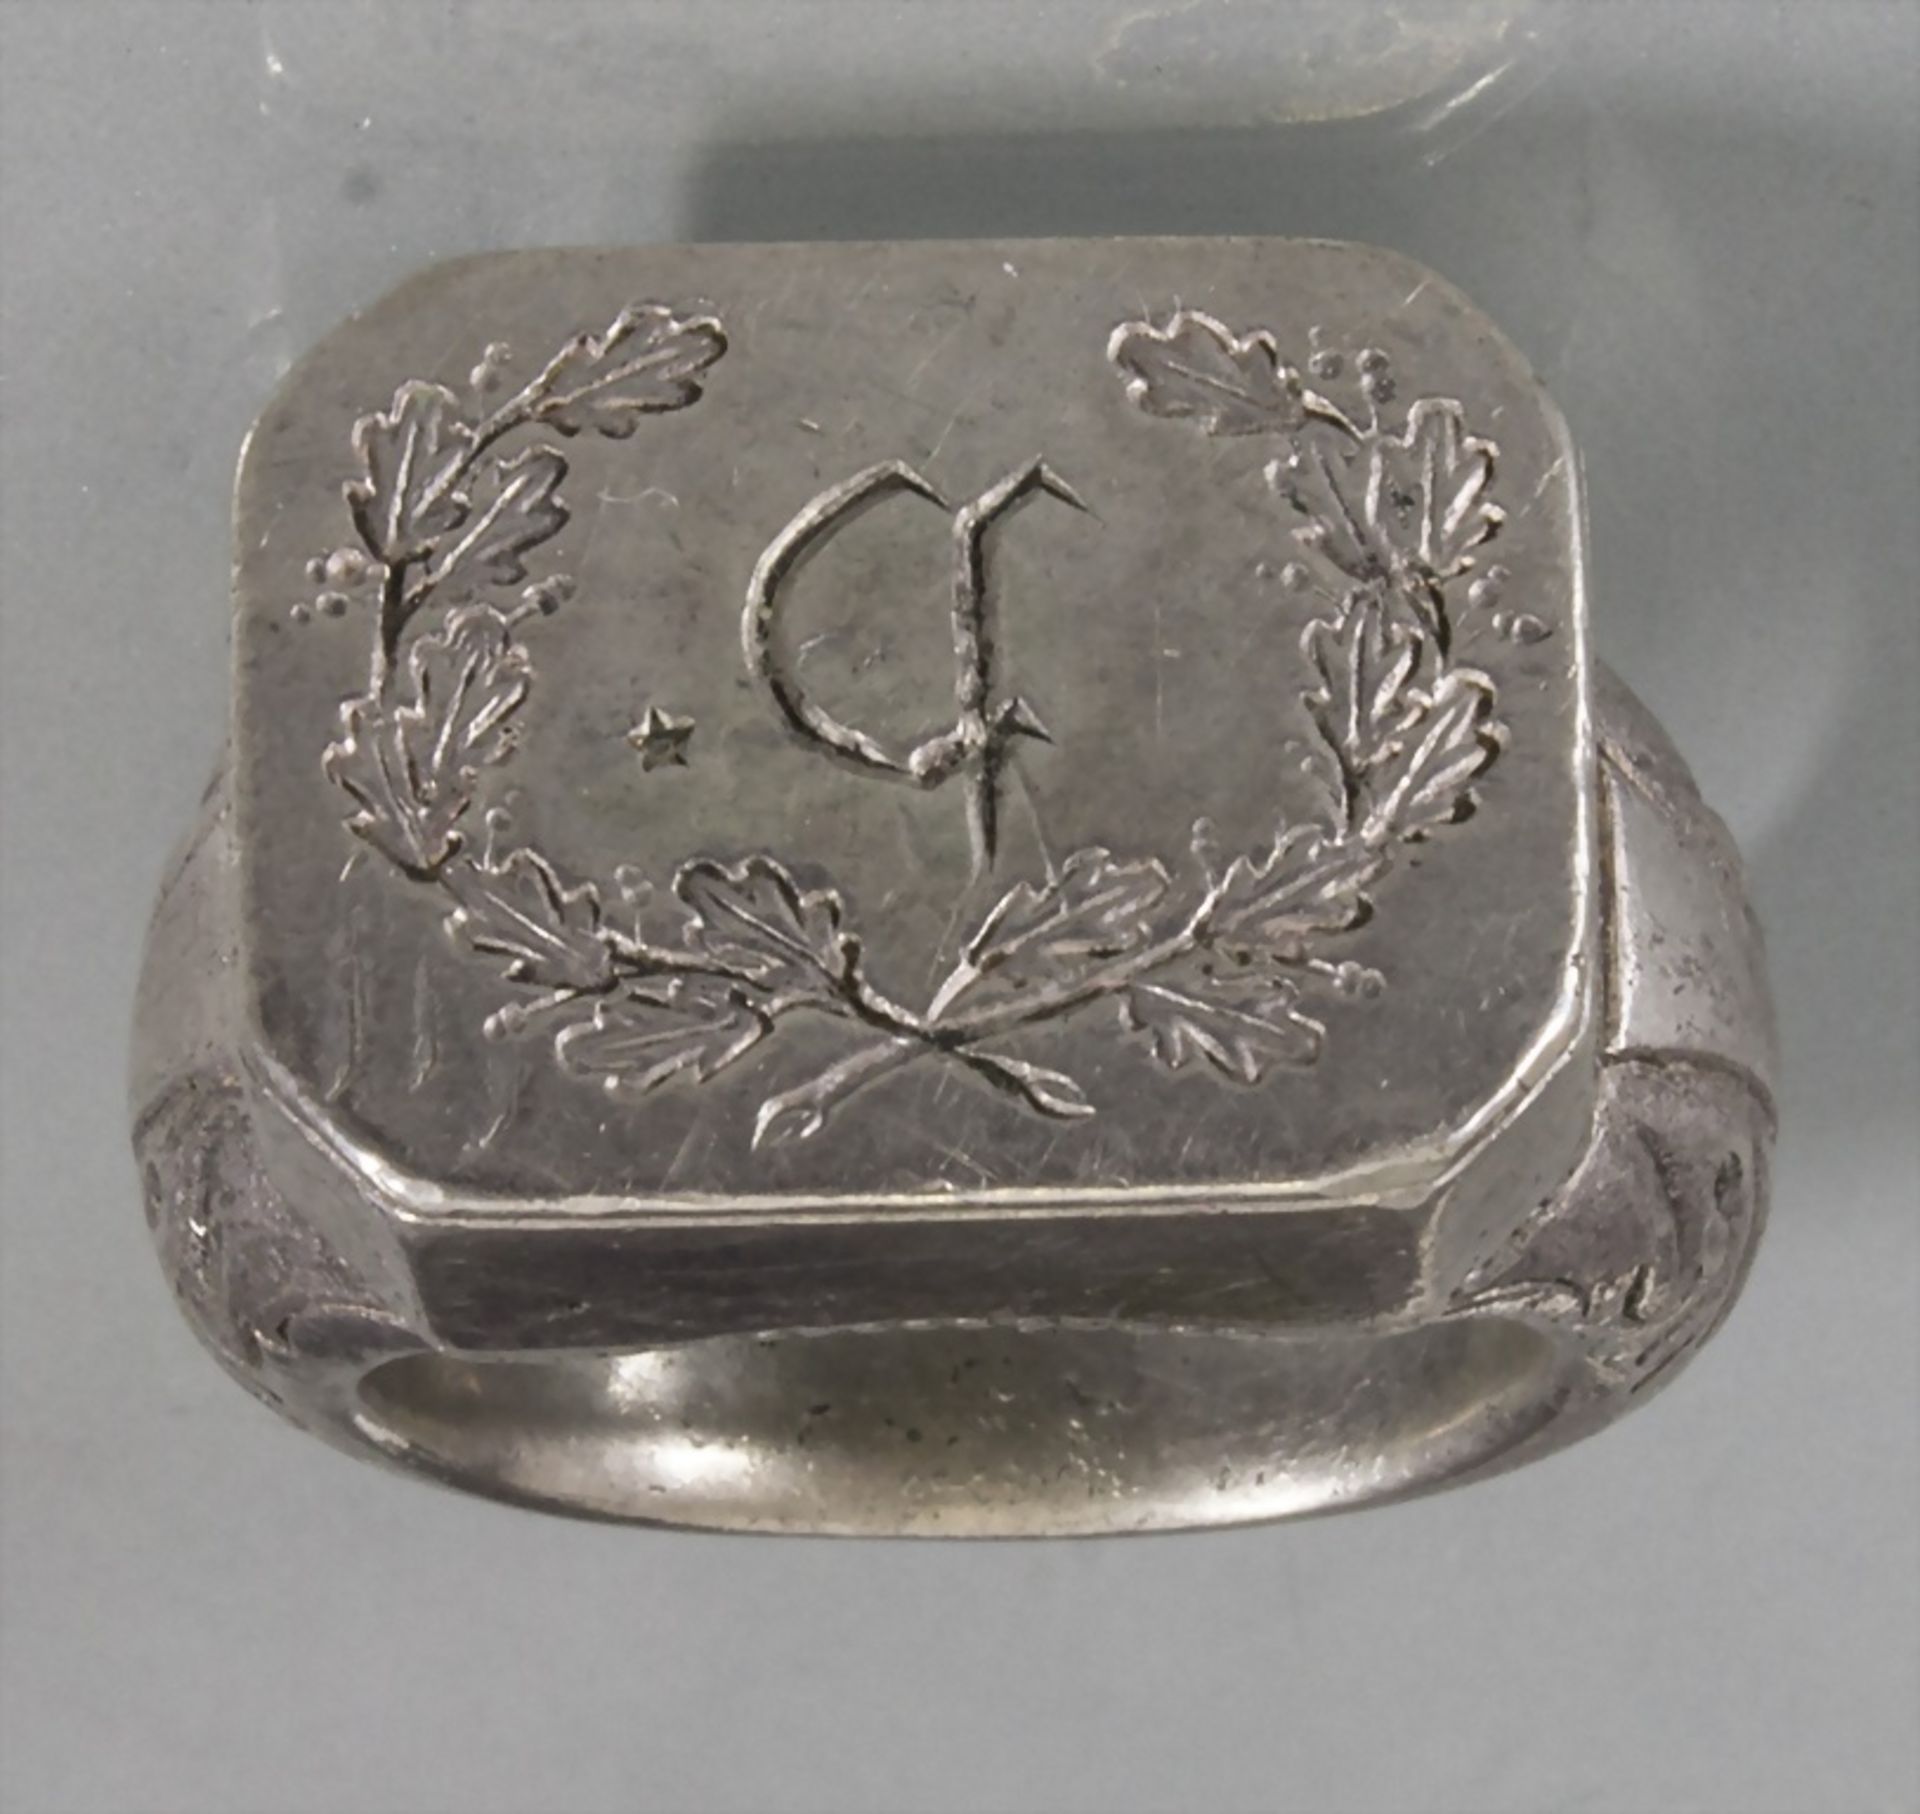 Siegelring / A silver seal ring, um 1818